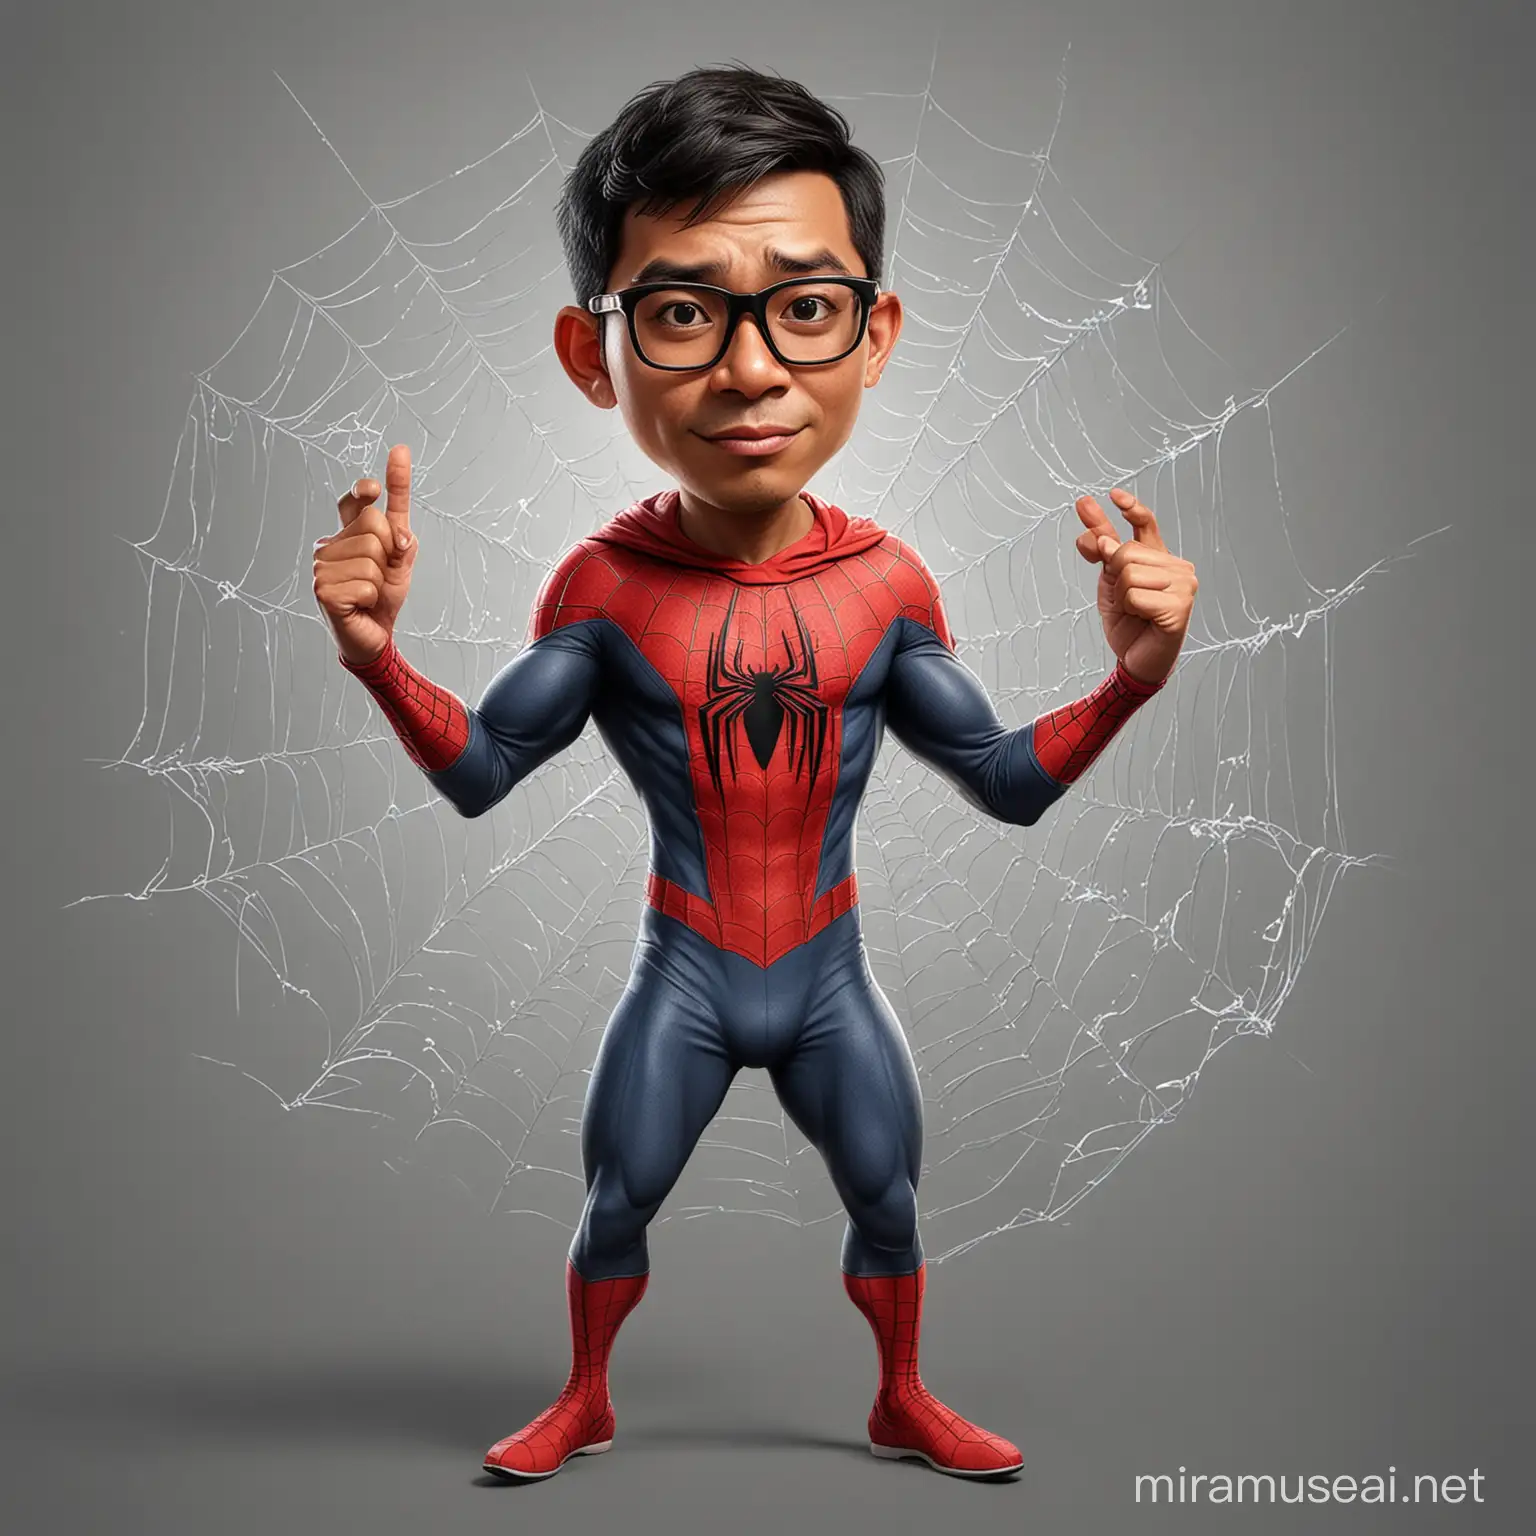 Whimsical Spiderman Caricature Playful Indonesian Man with WebSpinning Gesture